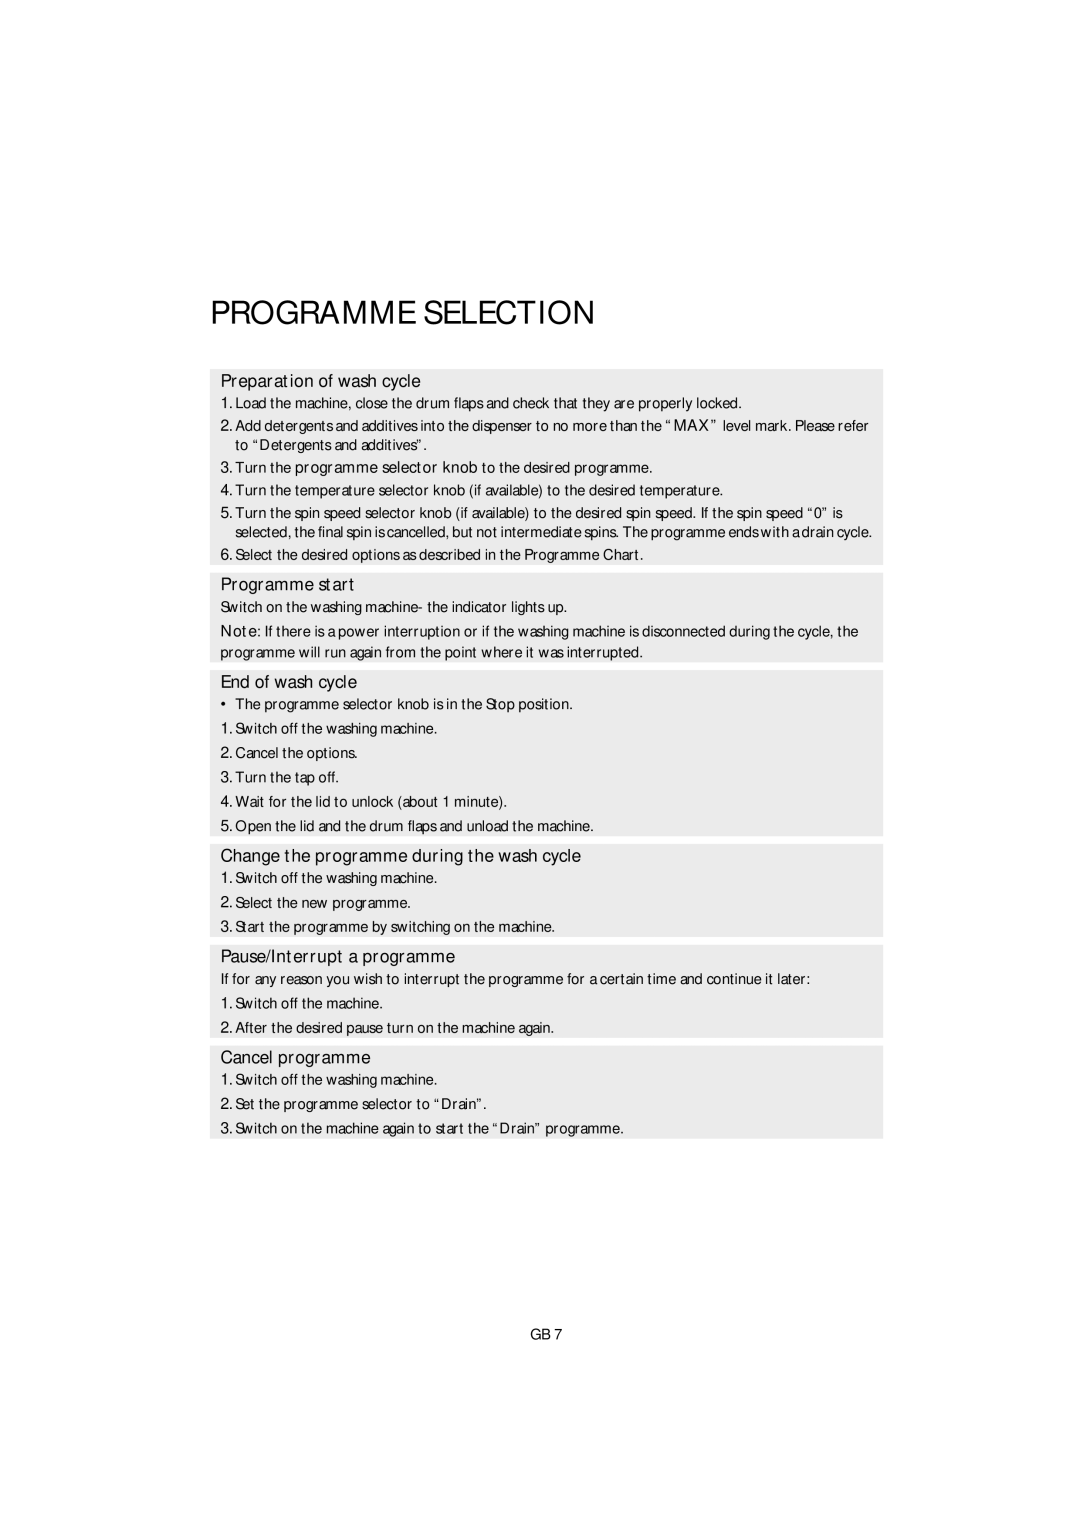 Smeg GB ST L80 manual Programme Selection, Preparation of wash cycle, Programme start, End of wash cycle, Cancel programme 